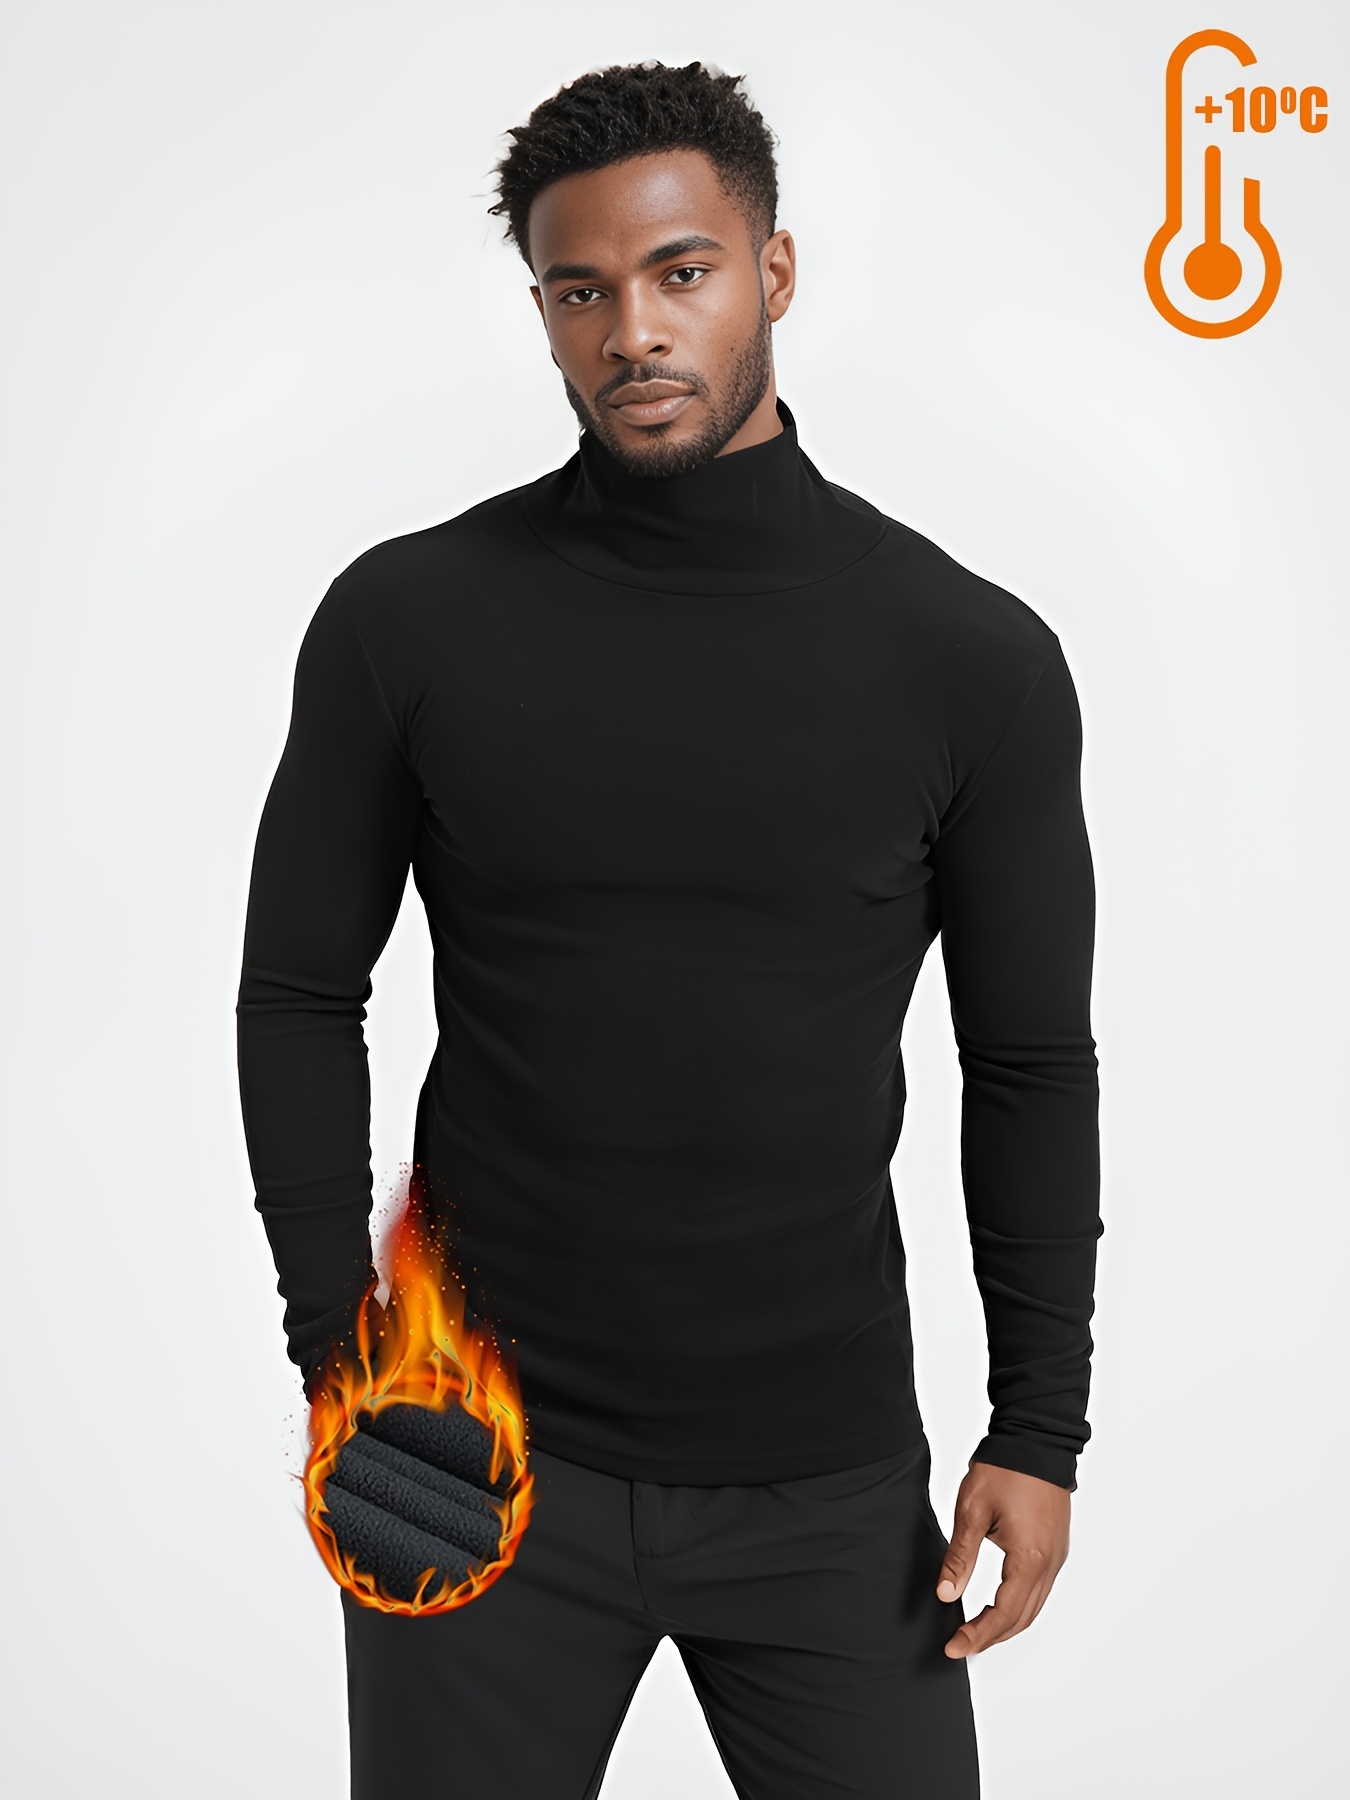 Men's Thermal Turtle Mock Neck Shirts, Long Sleeve Compression Shirts  Fleece Lined Undershirt Base Layer Tops